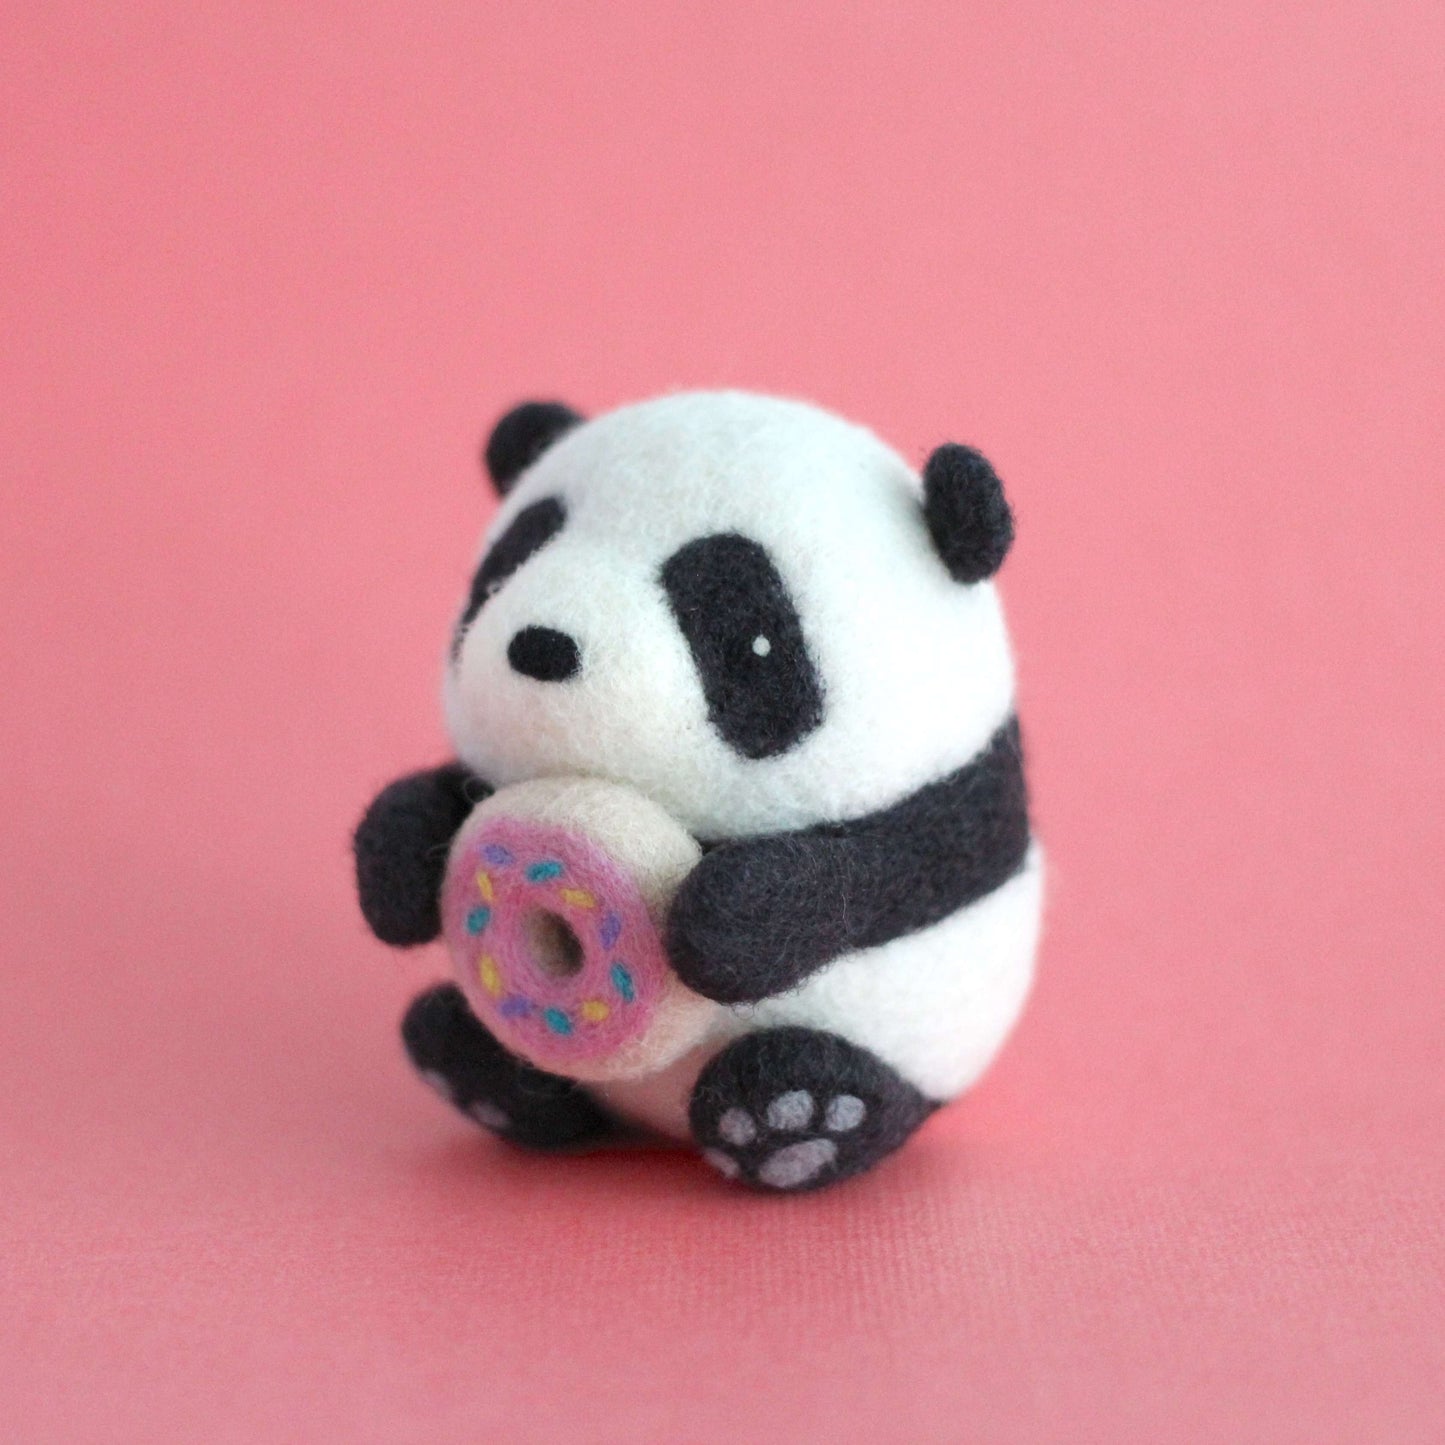 Needle Felted Panda holding Donut by Wild Whimsy Woolies